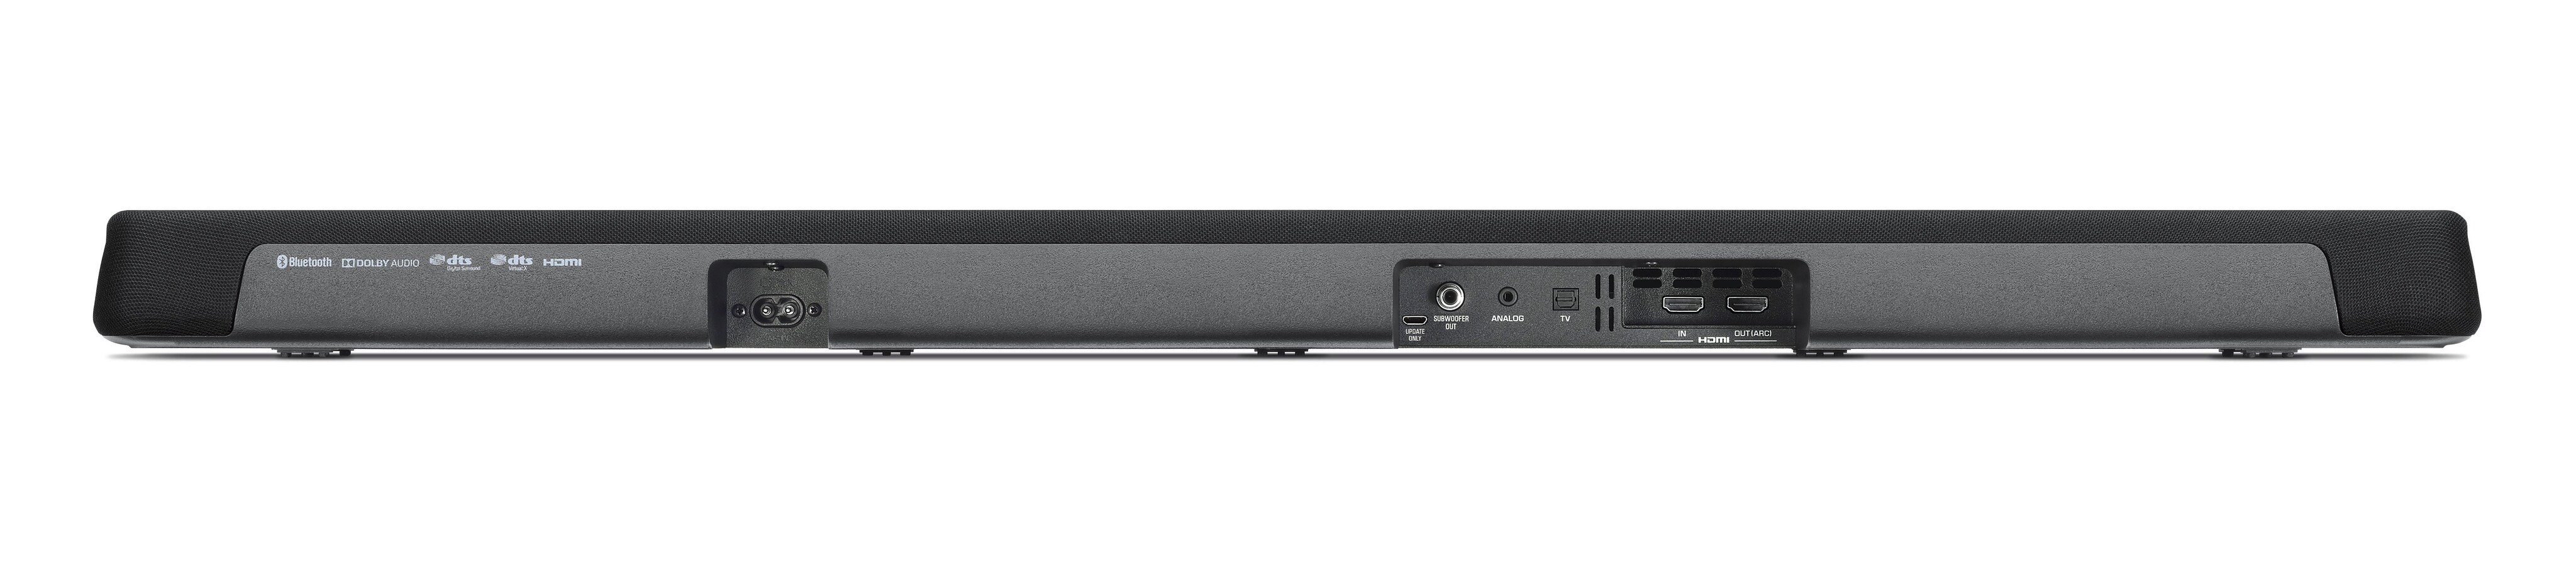 YAS-107 - Overview - Sound Bar - Audio & Visual - Products